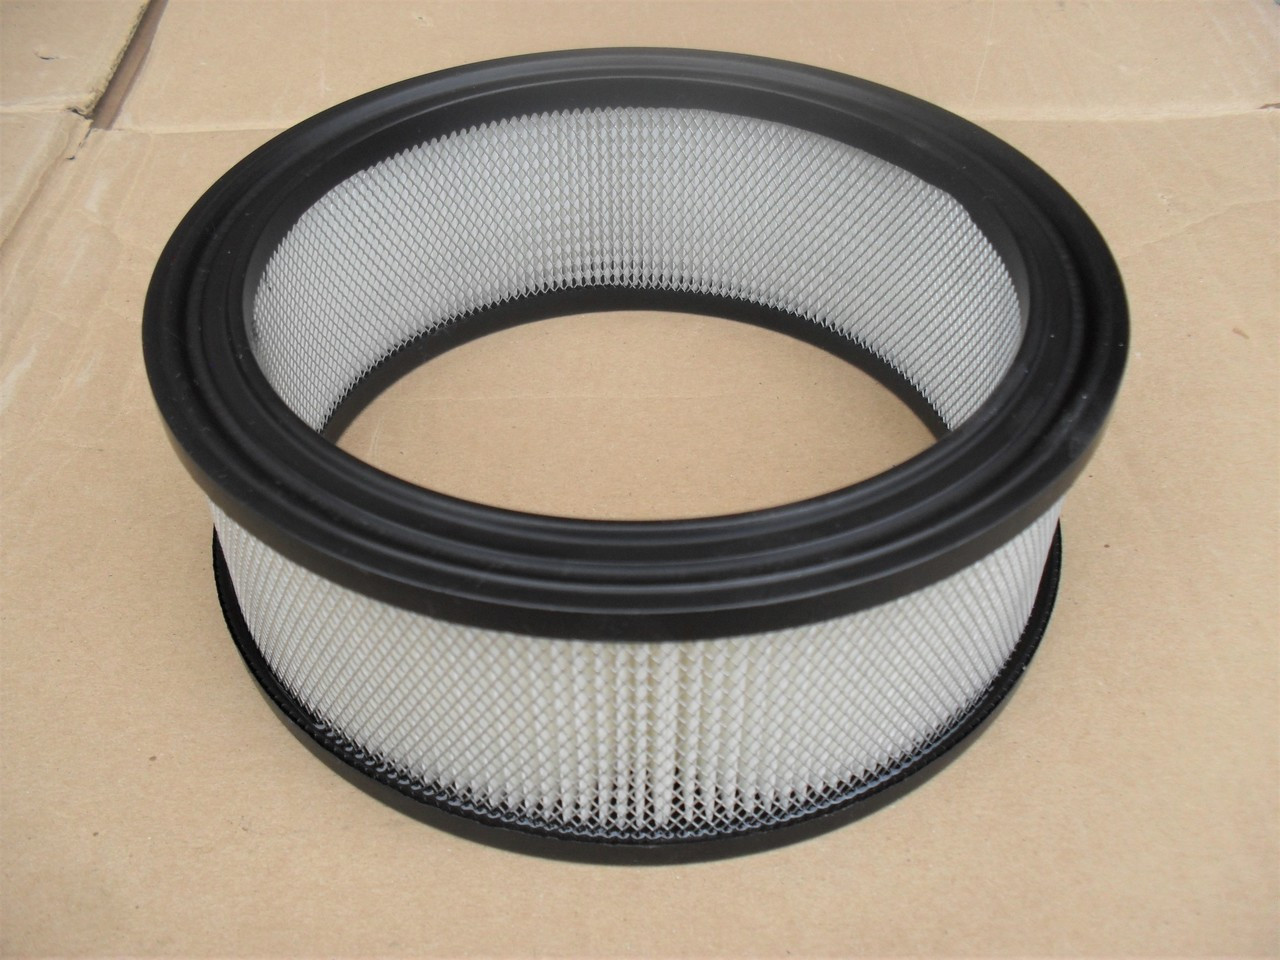 Air Filter for Craftsman 24620 ID: 5-9/16" OD: 7" Height: 2-7/16"